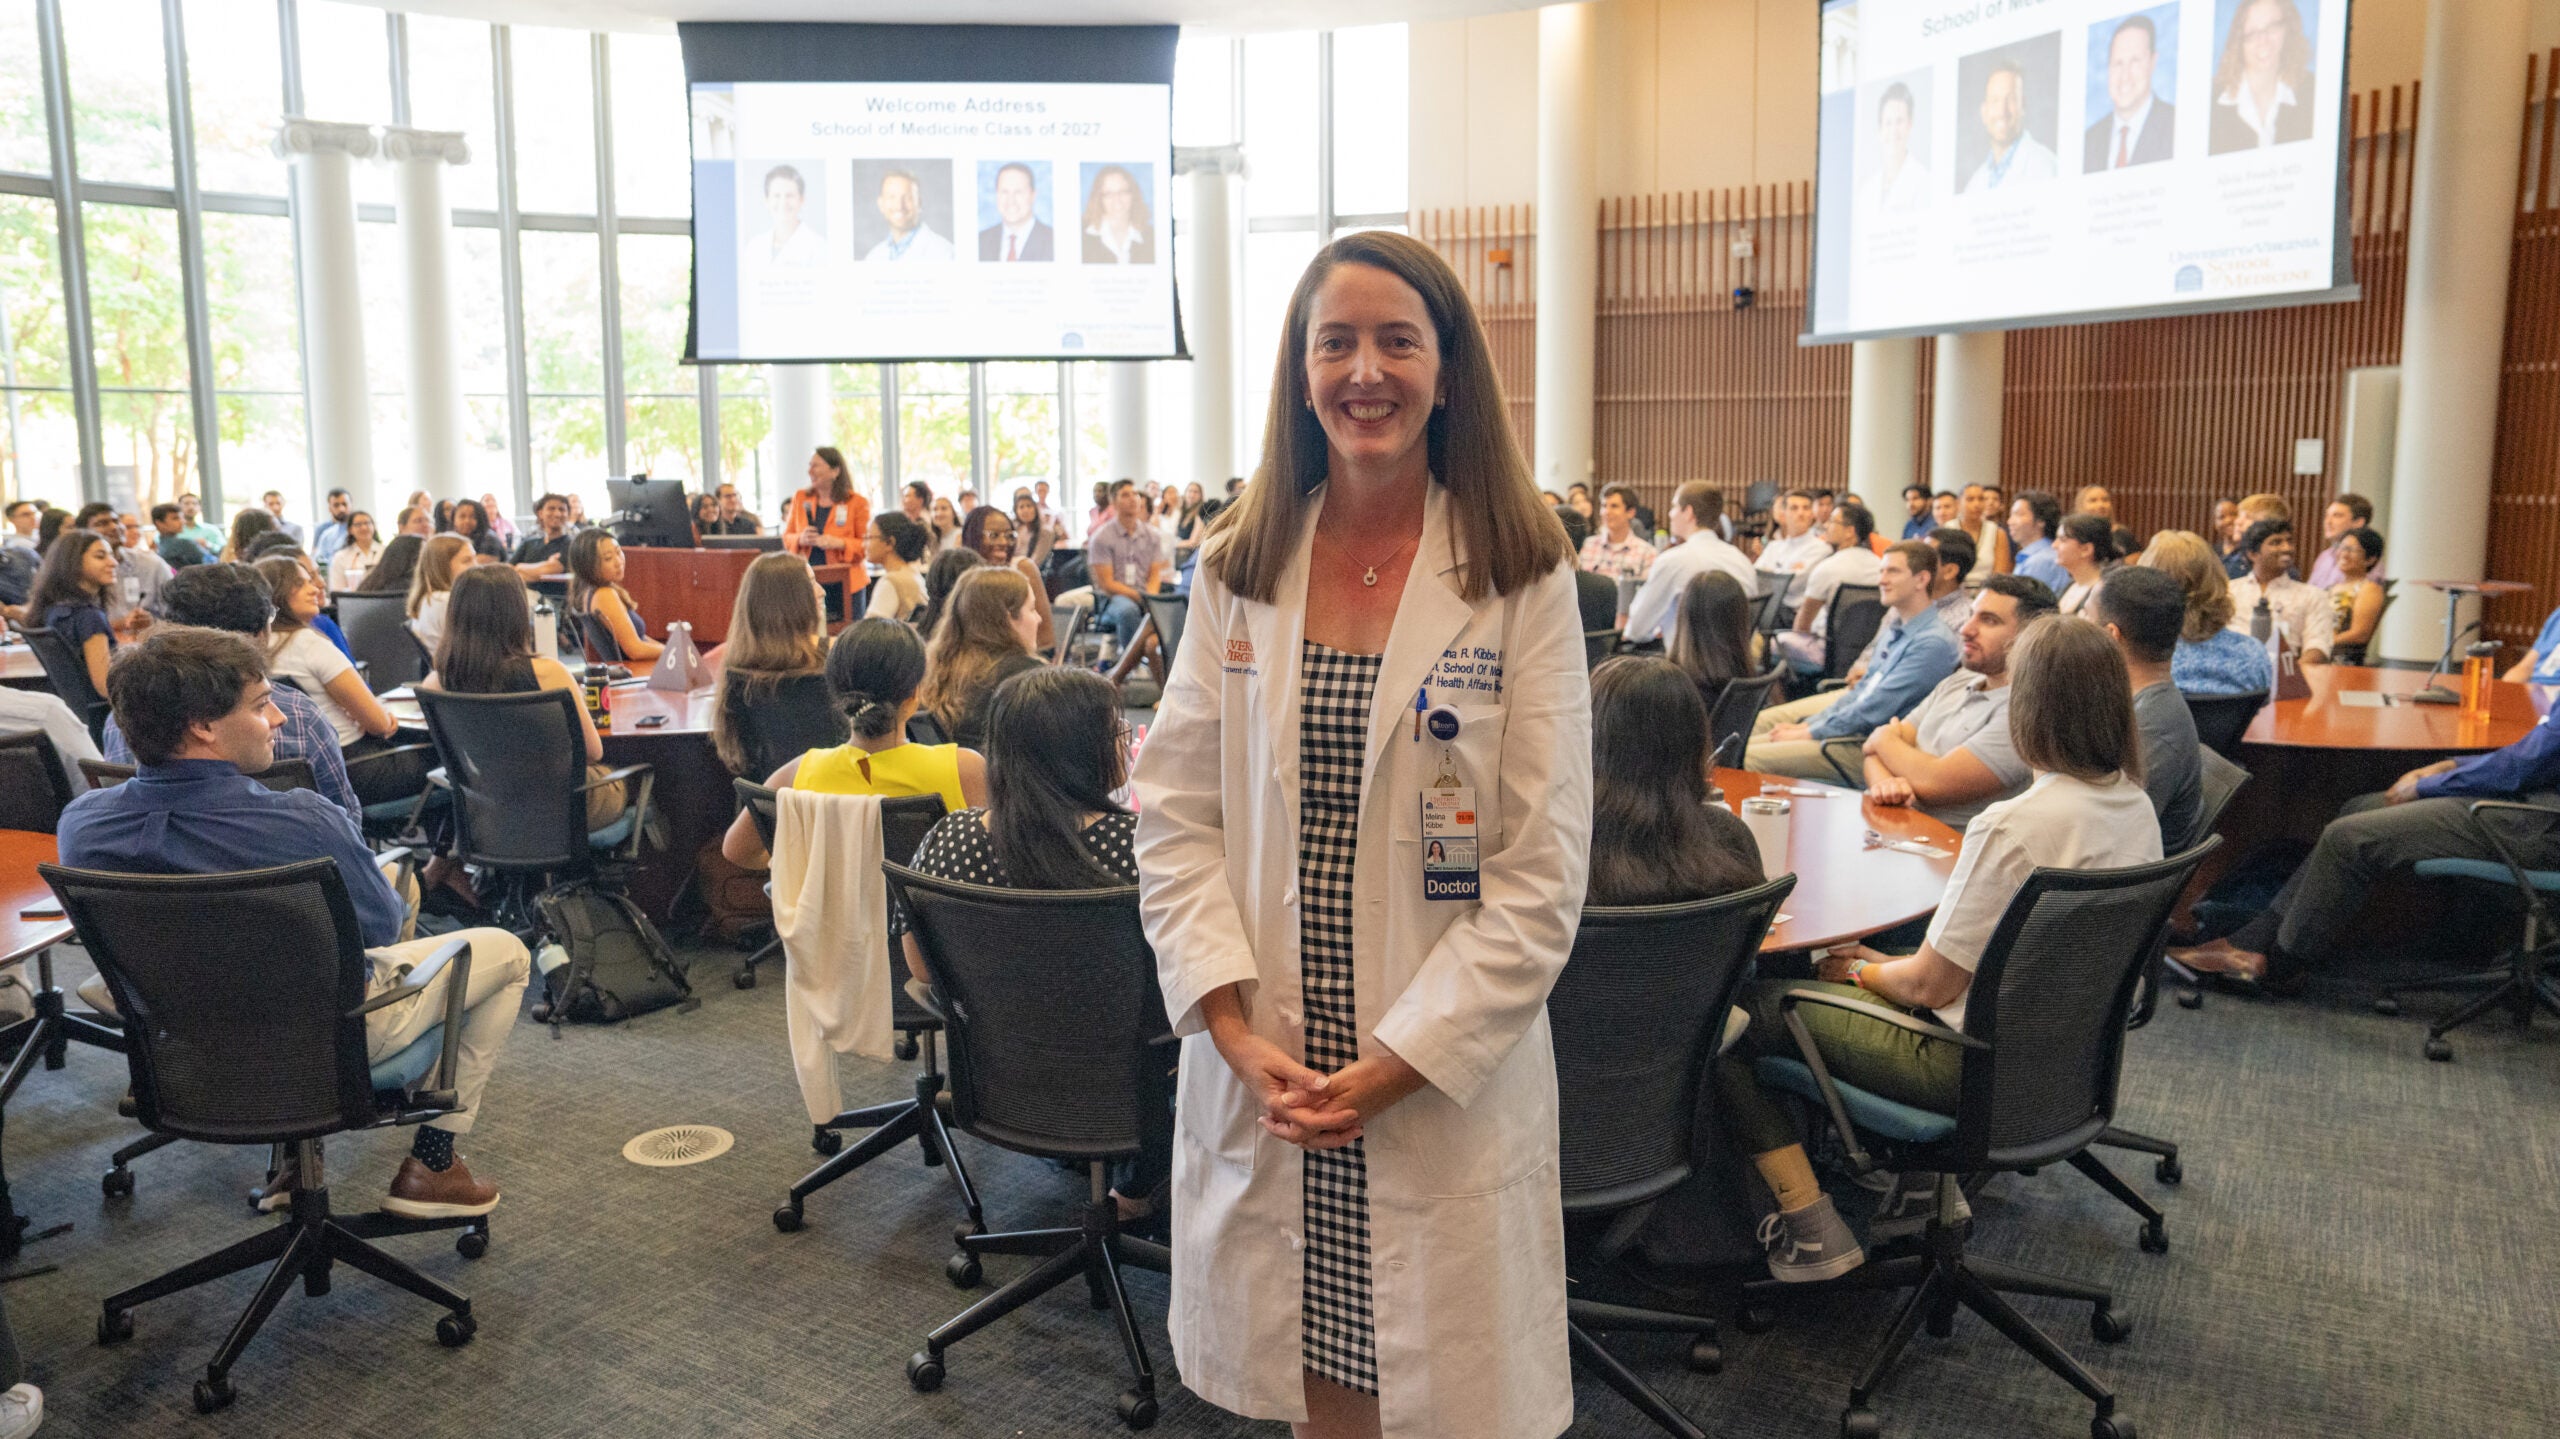 School of Medicine Welcomes the 2027 Medical Students - Education - Medicine in Motion News